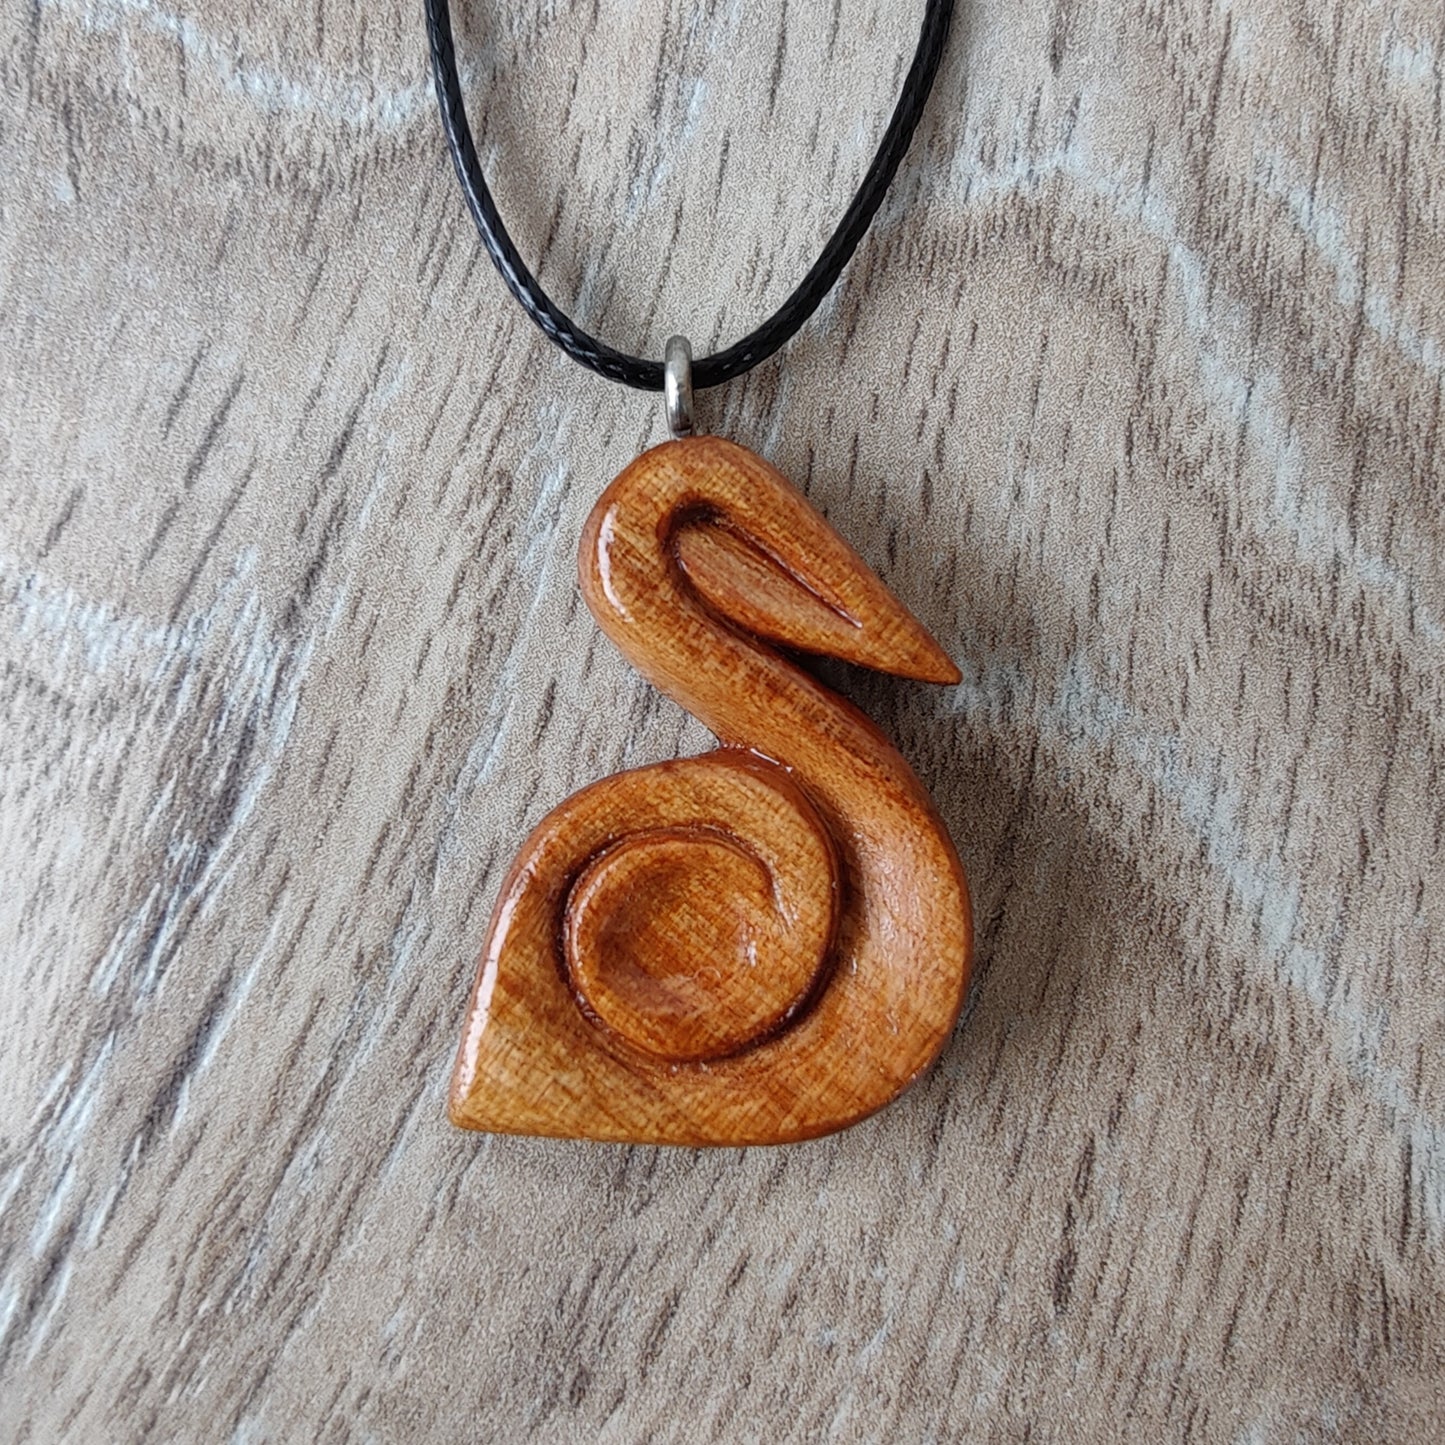 Pelican "Pélican" Necklace | Hand-Carved Apricot Wood Pendant, Waxed Rope | Secrets of Ouanalao